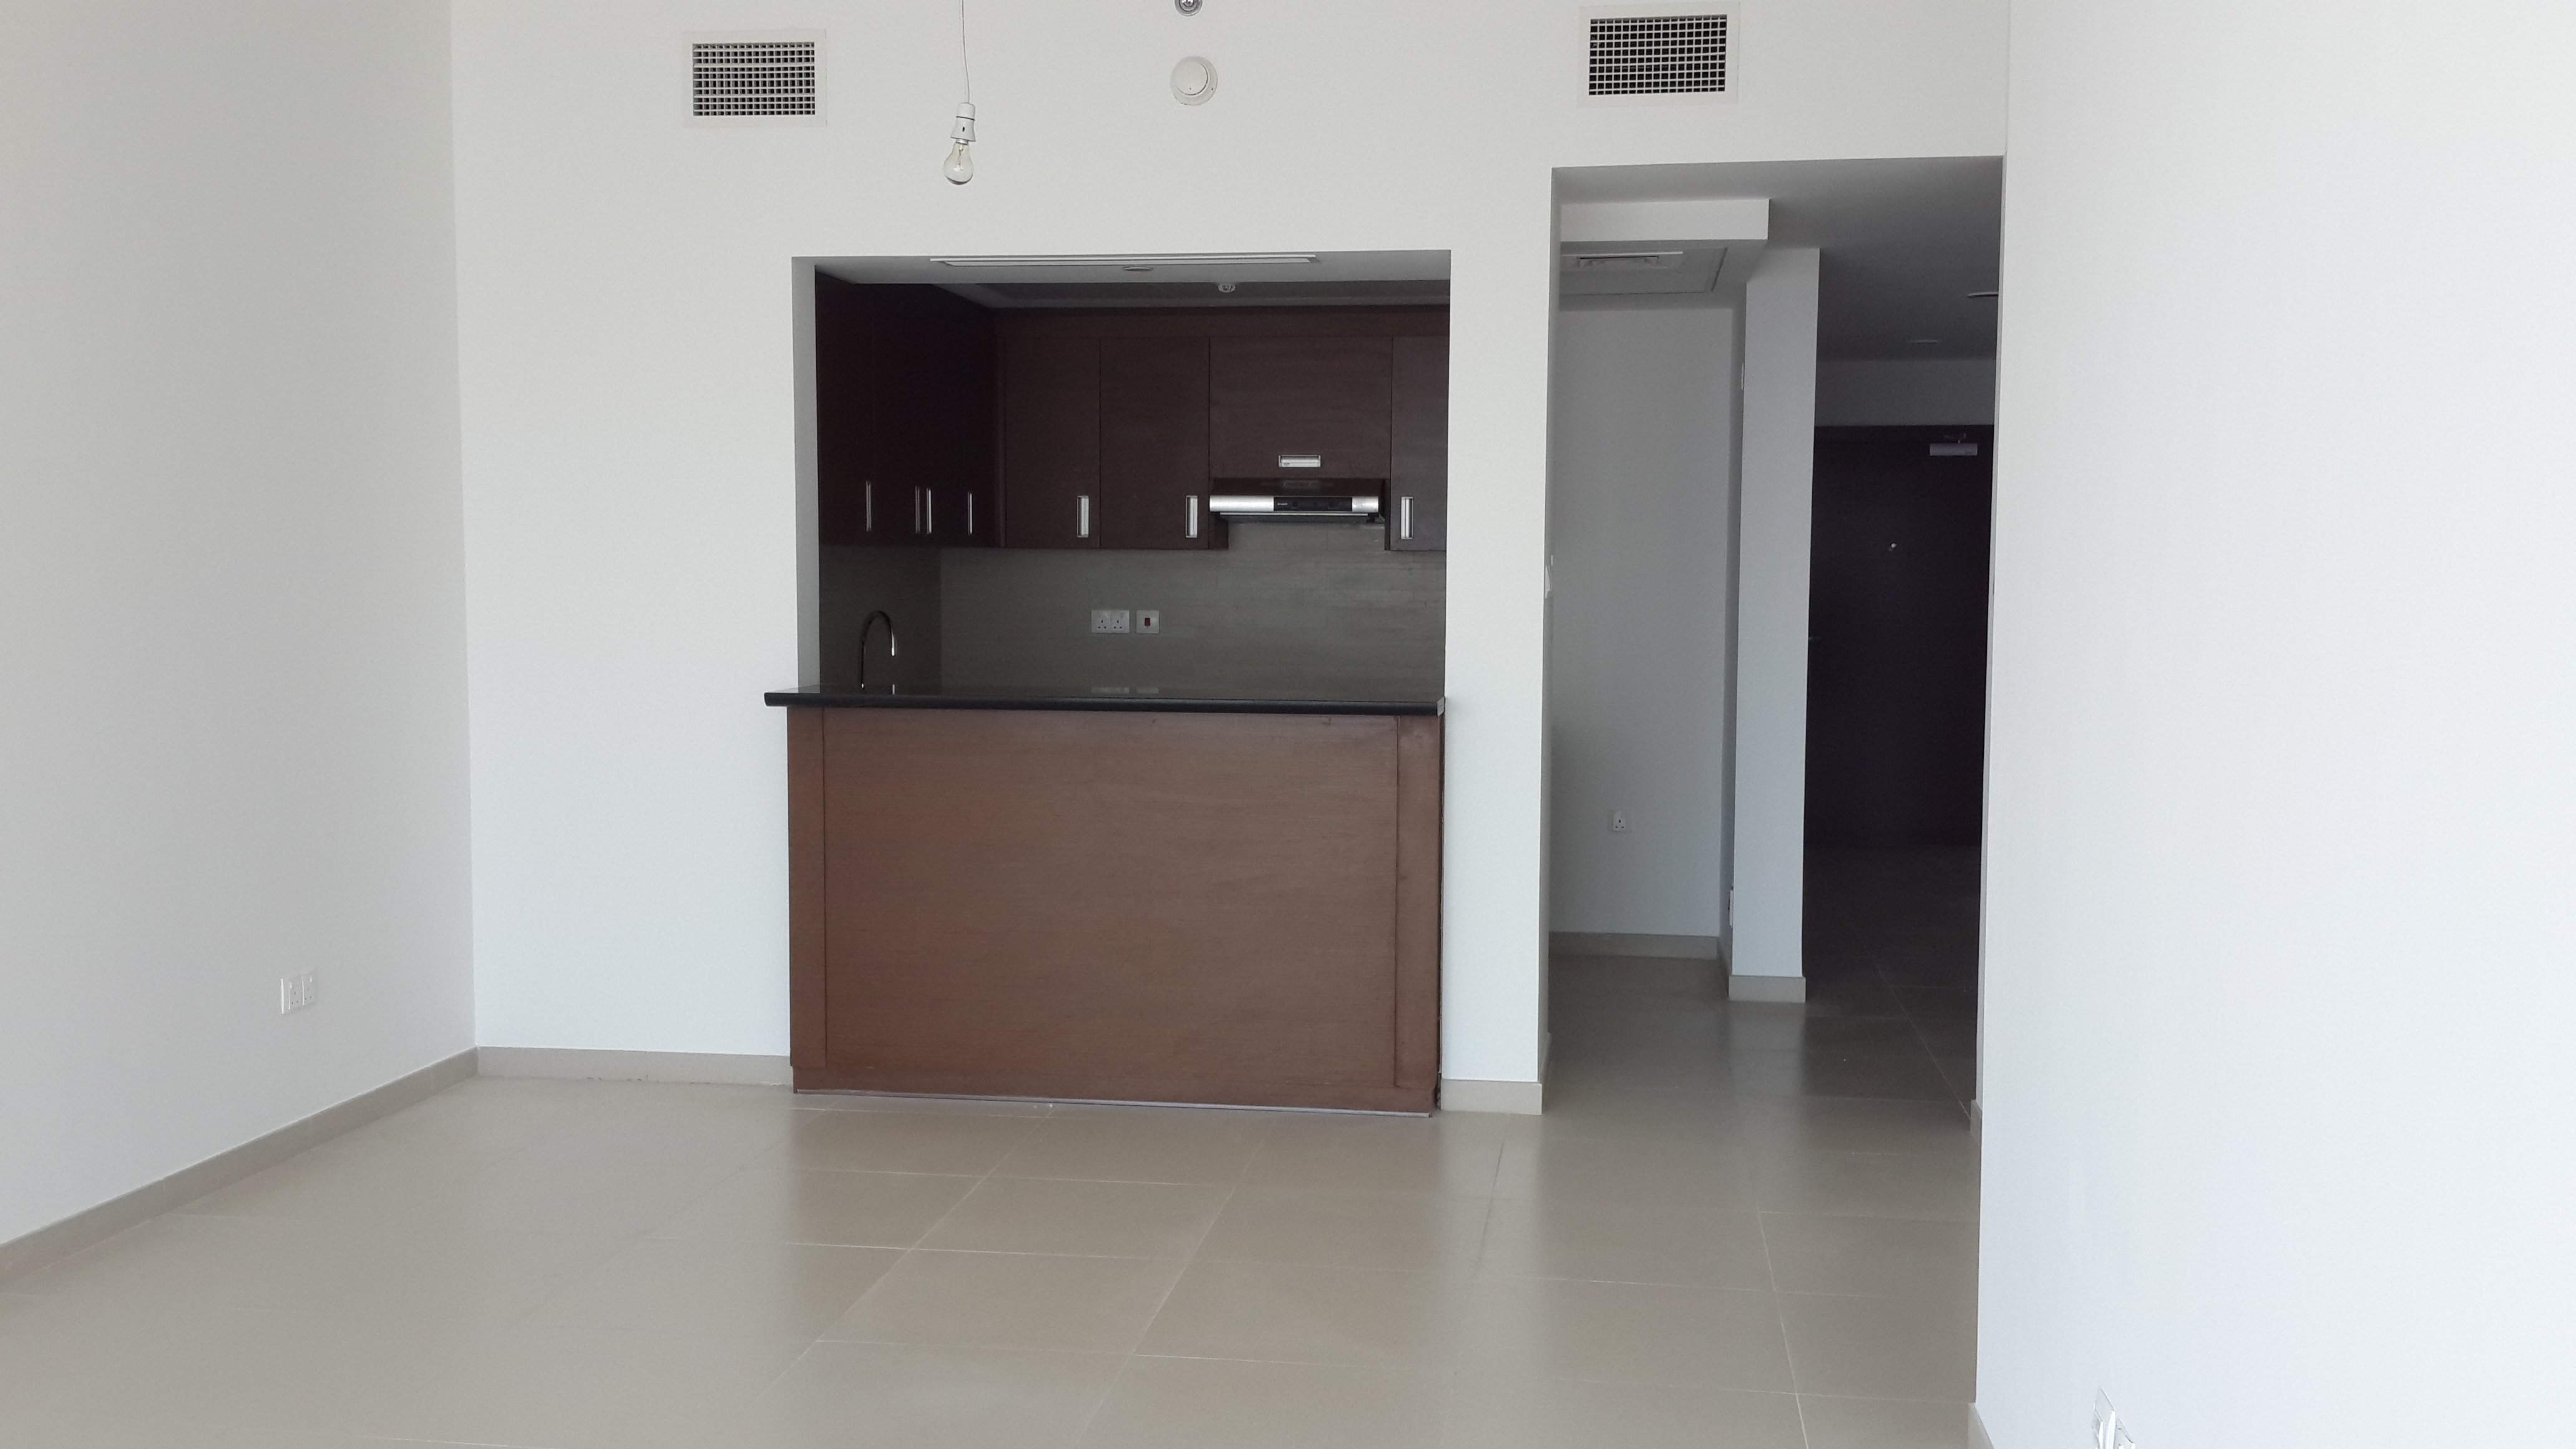 1BHK well maintained apartment